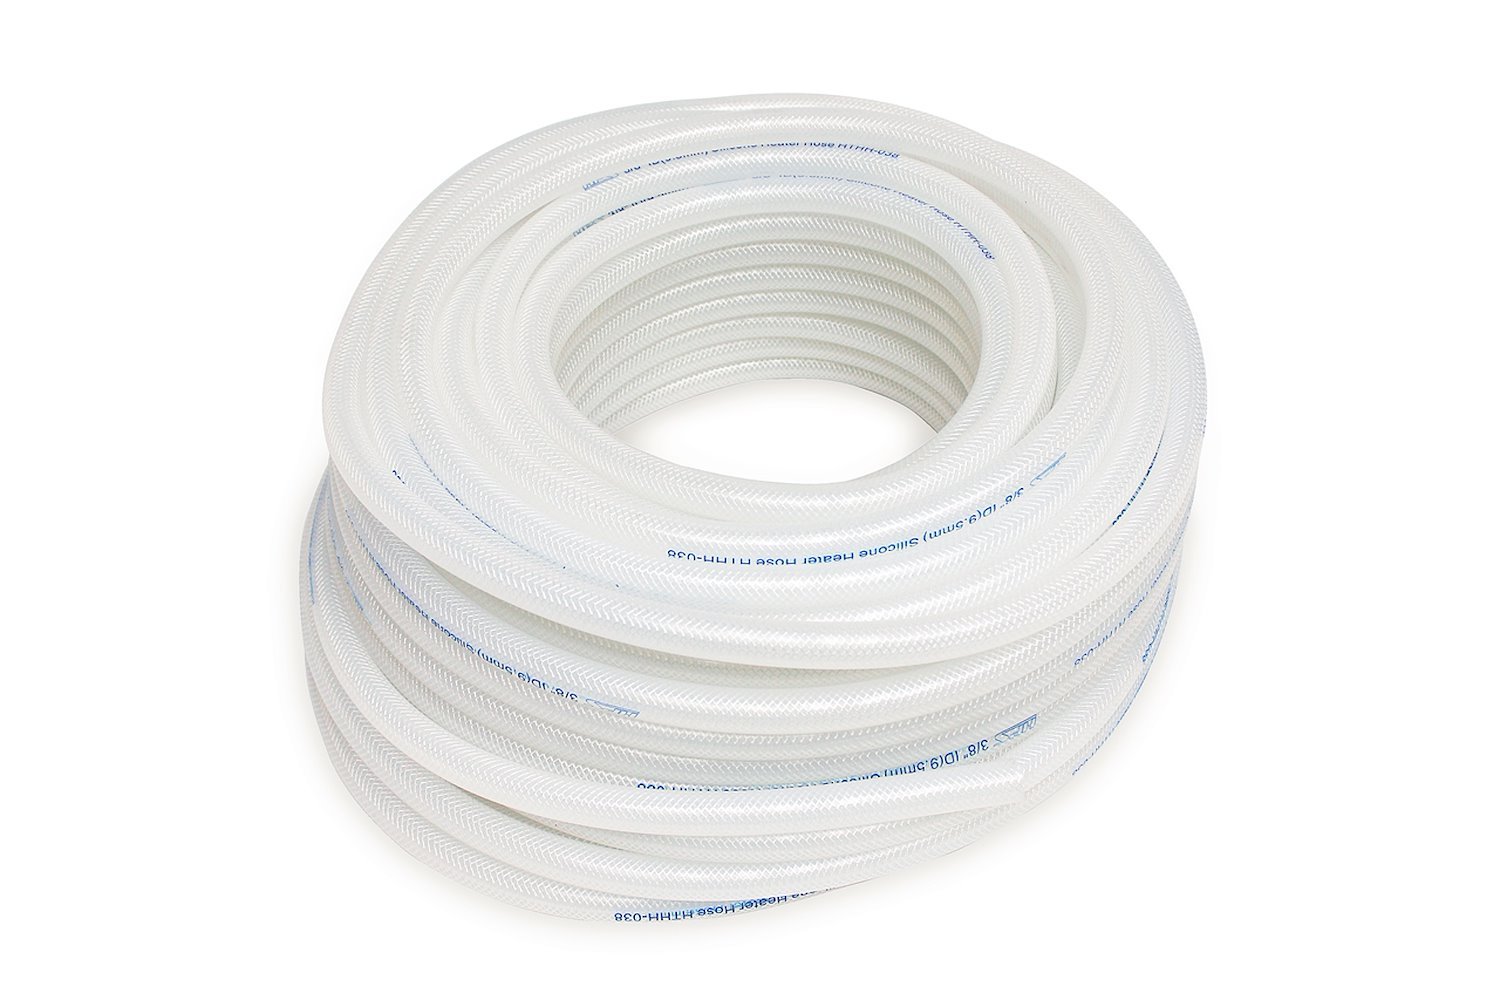 HTHH-075-CLEARx50 Silicone Heater Hose Tubing, High-Temp Reinforced, 3/4 in. ID, 50 ft. Roll, Clear